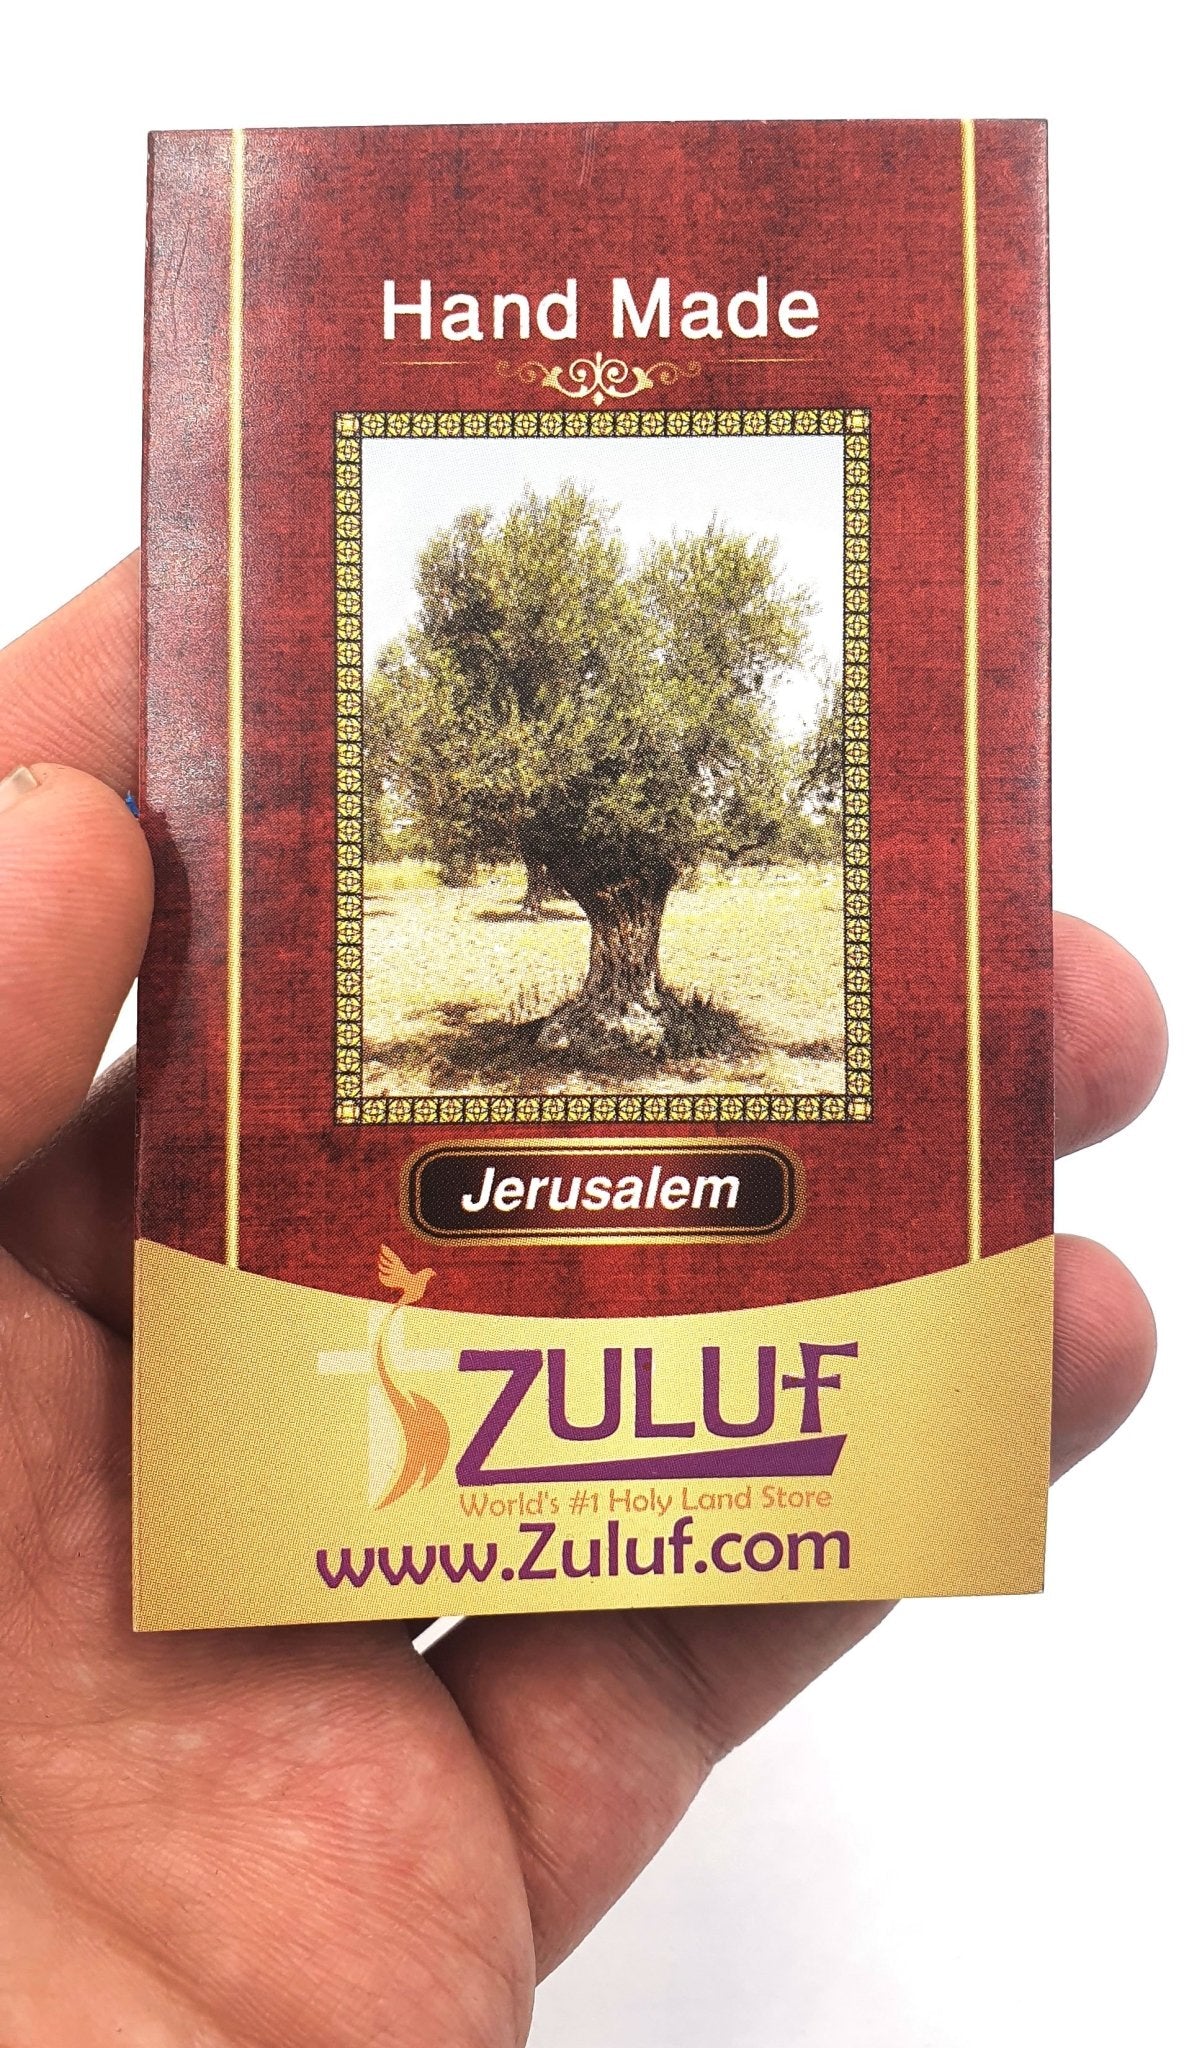 Holy Water From The Jordan River In 1 7/8 Inch Glass Vial Bottle | Blessed Holy Water Catholic Mini Holy Water Bottle Glass From Jordan River Holy Land Israel | House Blessing Jerusalem Gifts HLG004 - Zuluf